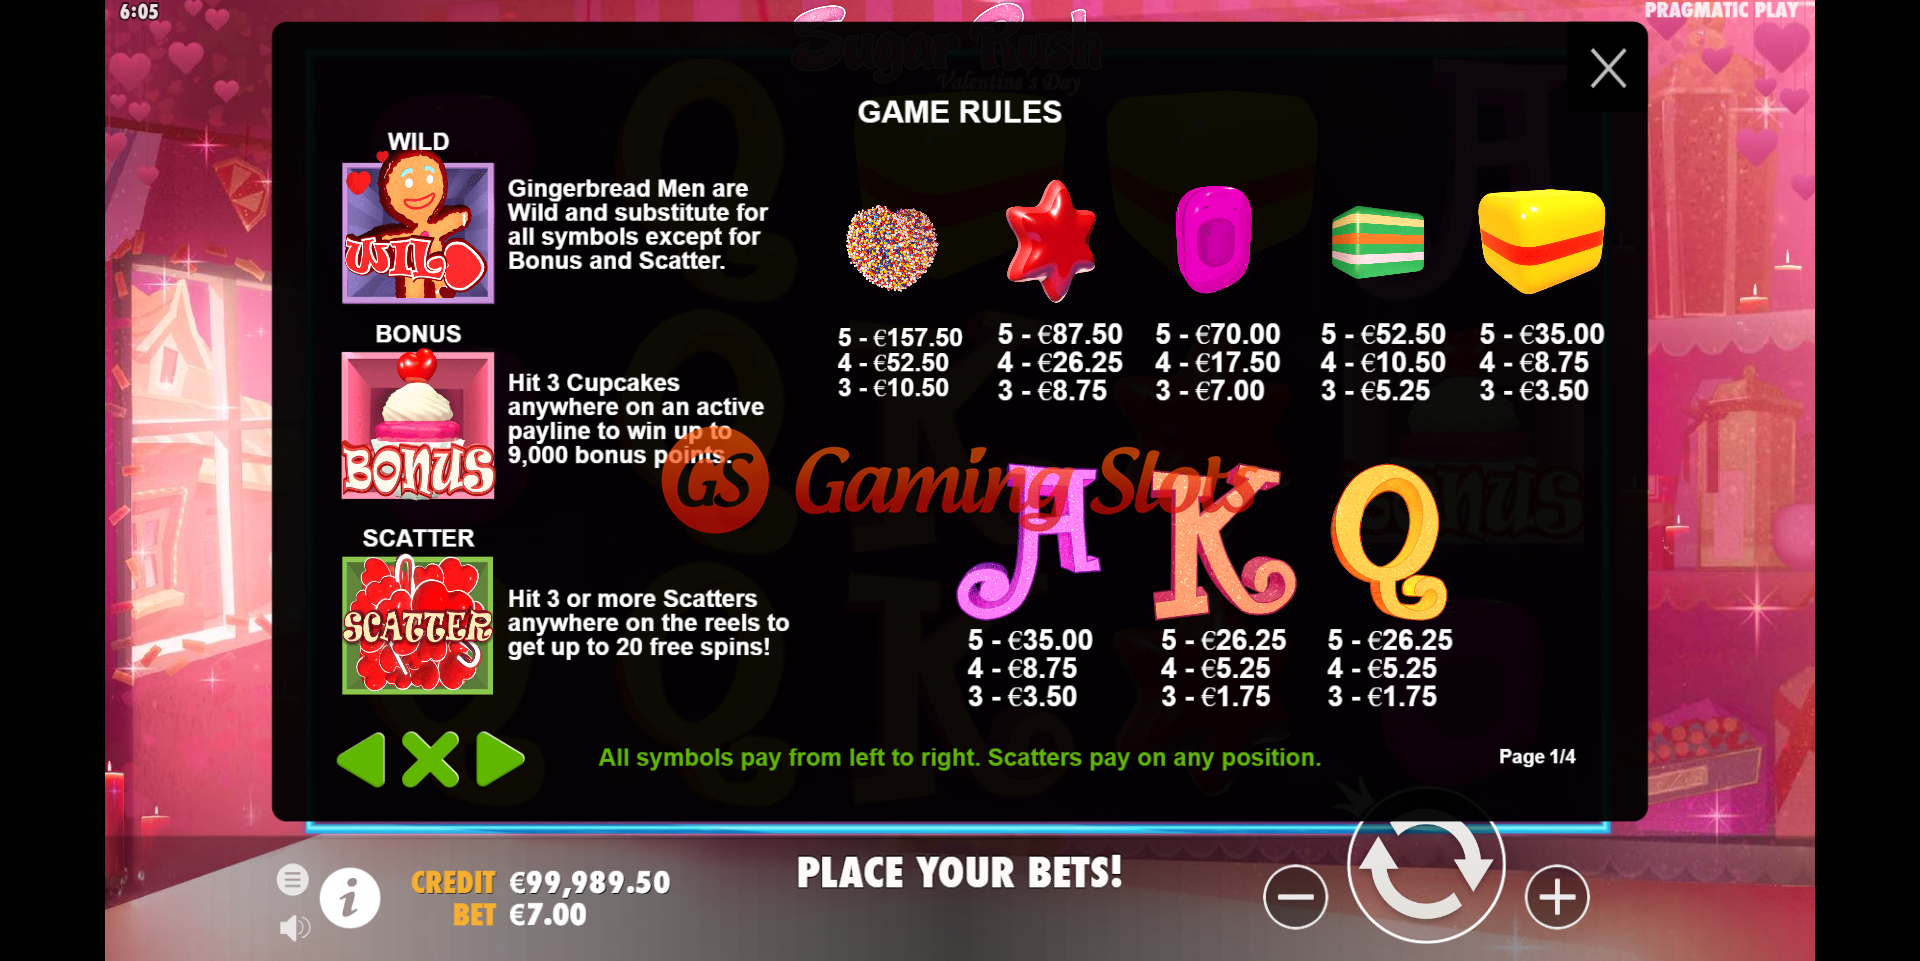 Game Rules for Sugar Rush Valentine's Day slot from Pragmatic Play